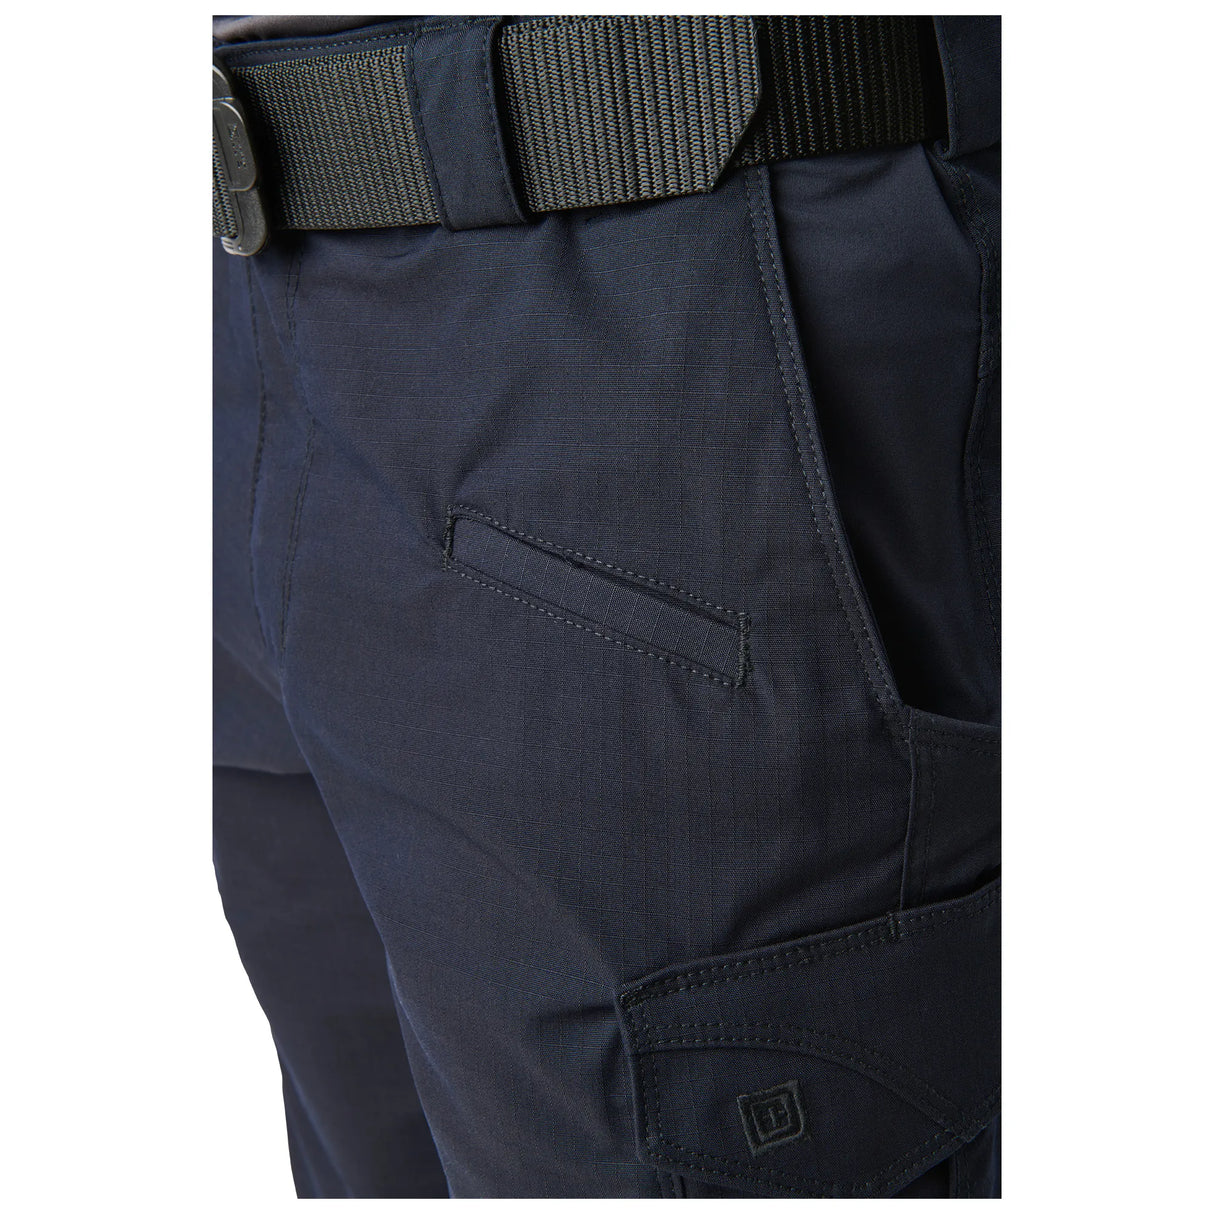 Comfort Waistband: Offers a secure and comfortable fit during extended wear.